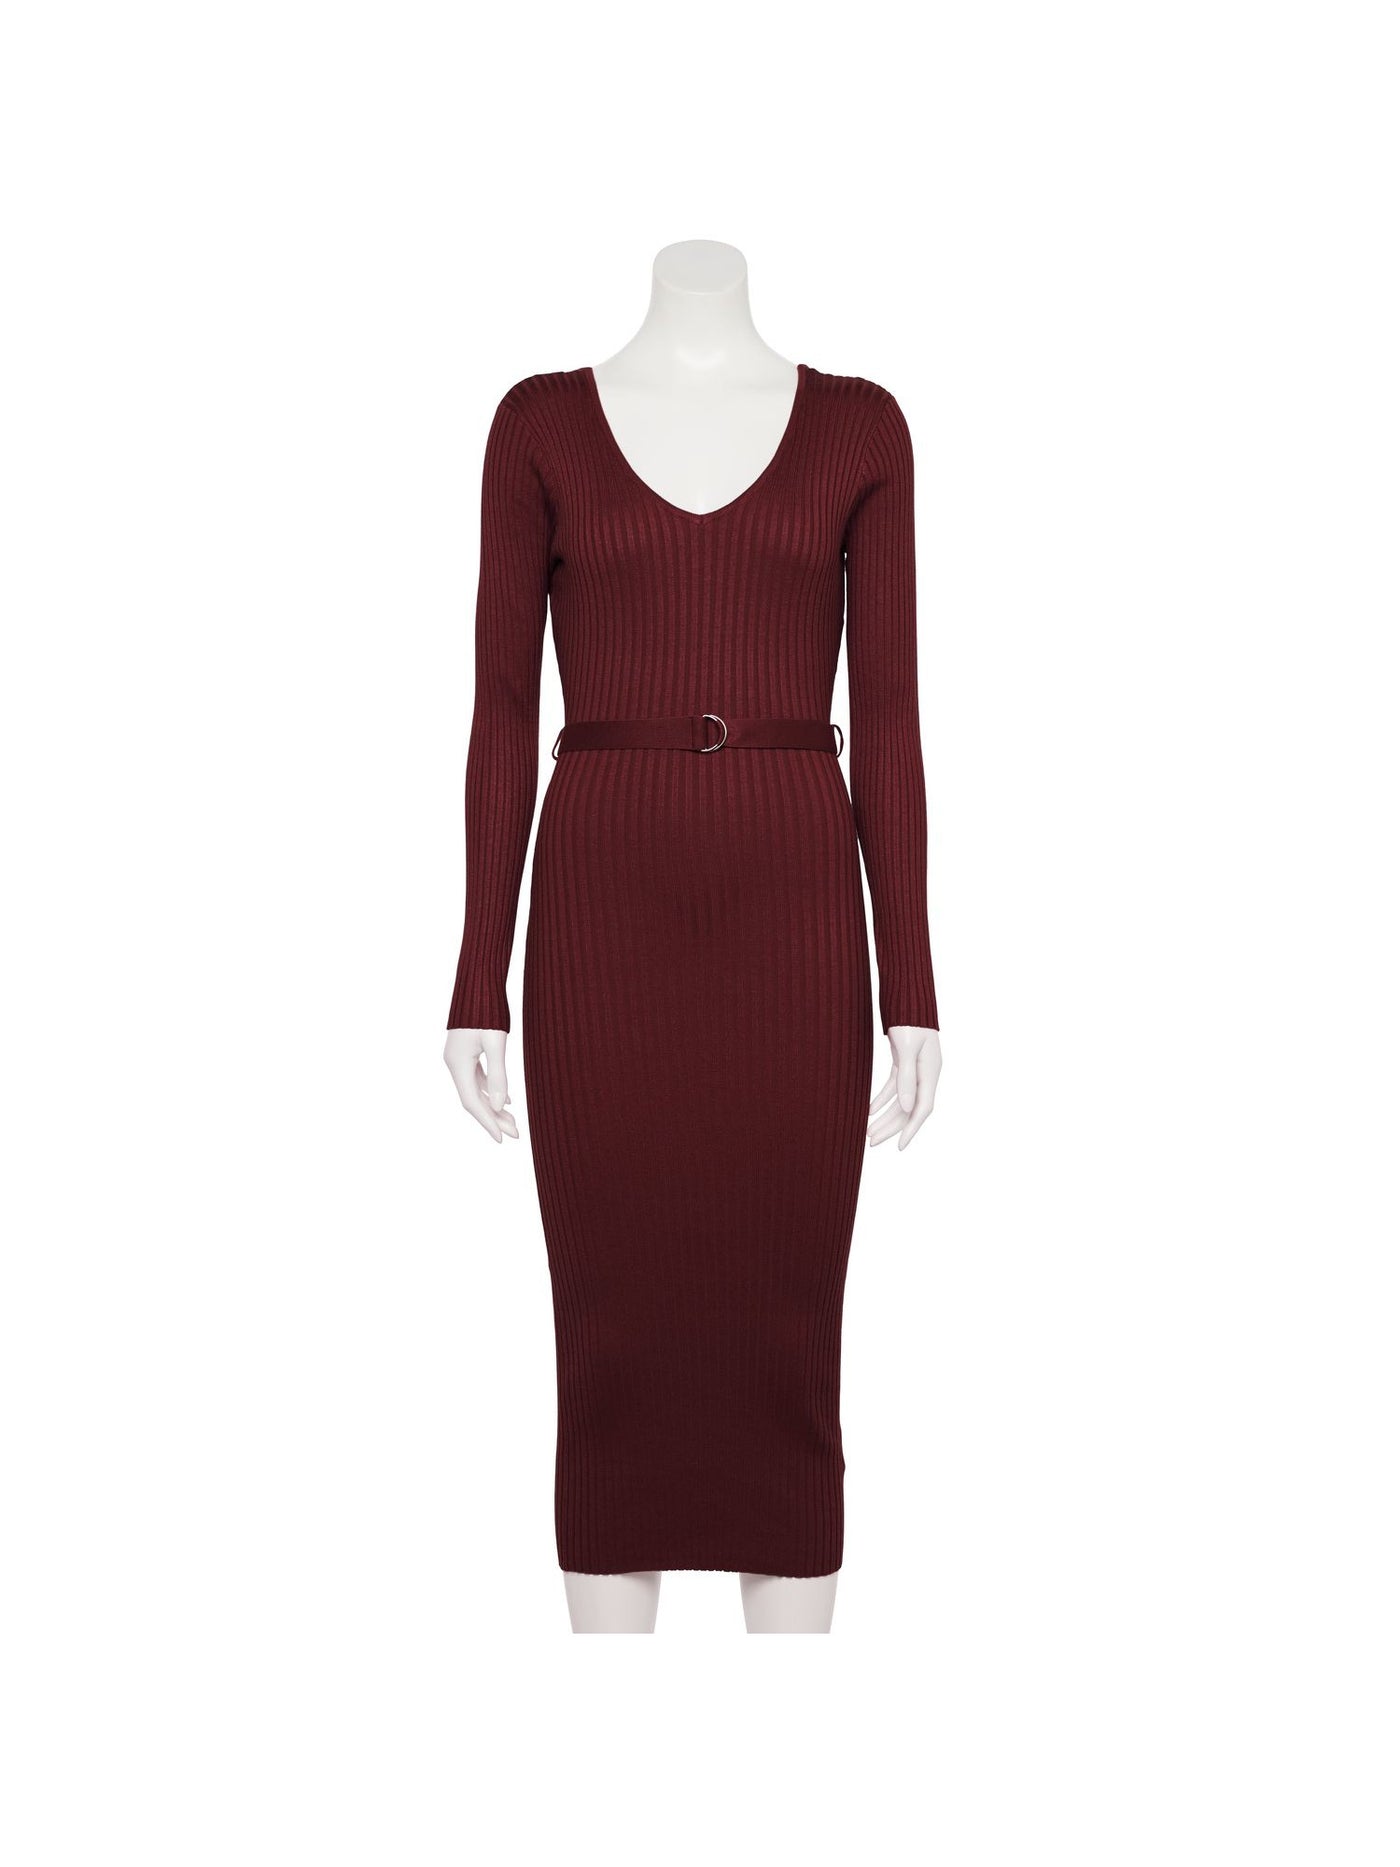 ALMOST FAMOUS Womens Burgundy Ribbed Belted V-back Long Sleeve V Neck Midi Party Body Con Dress Juniors S